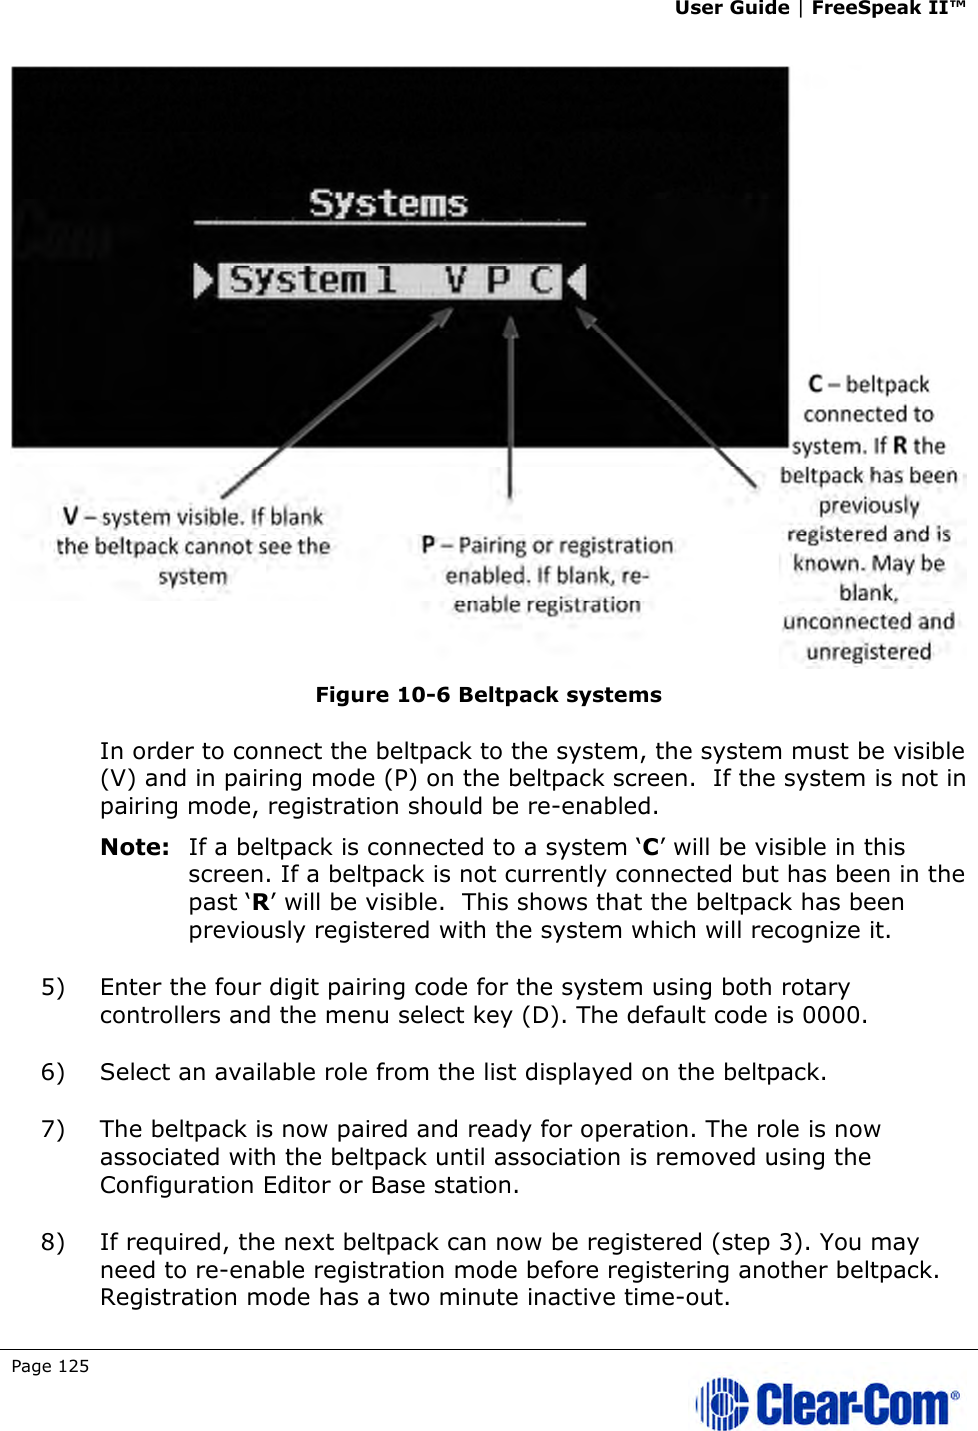 User Guide | FreeSpeak II™  Page 125    Figure 10-6 Beltpack systems In order to connect the beltpack to the system, the system must be visible (V) and in pairing mode (P) on the beltpack screen.  If the system is not in pairing mode, registration should be re-enabled.  Note: If a beltpack is connected to a system ‘C’ will be visible in this screen. If a beltpack is not currently connected but has been in the past ‘R’ will be visible.  This shows that the beltpack has been previously registered with the system which will recognize it.  5) Enter the four digit pairing code for the system using both rotary controllers and the menu select key (D). The default code is 0000.  6) Select an available role from the list displayed on the beltpack. 7) The beltpack is now paired and ready for operation. The role is now associated with the beltpack until association is removed using the Configuration Editor or Base station. 8) If required, the next beltpack can now be registered (step 3). You may need to re-enable registration mode before registering another beltpack. Registration mode has a two minute inactive time-out.  